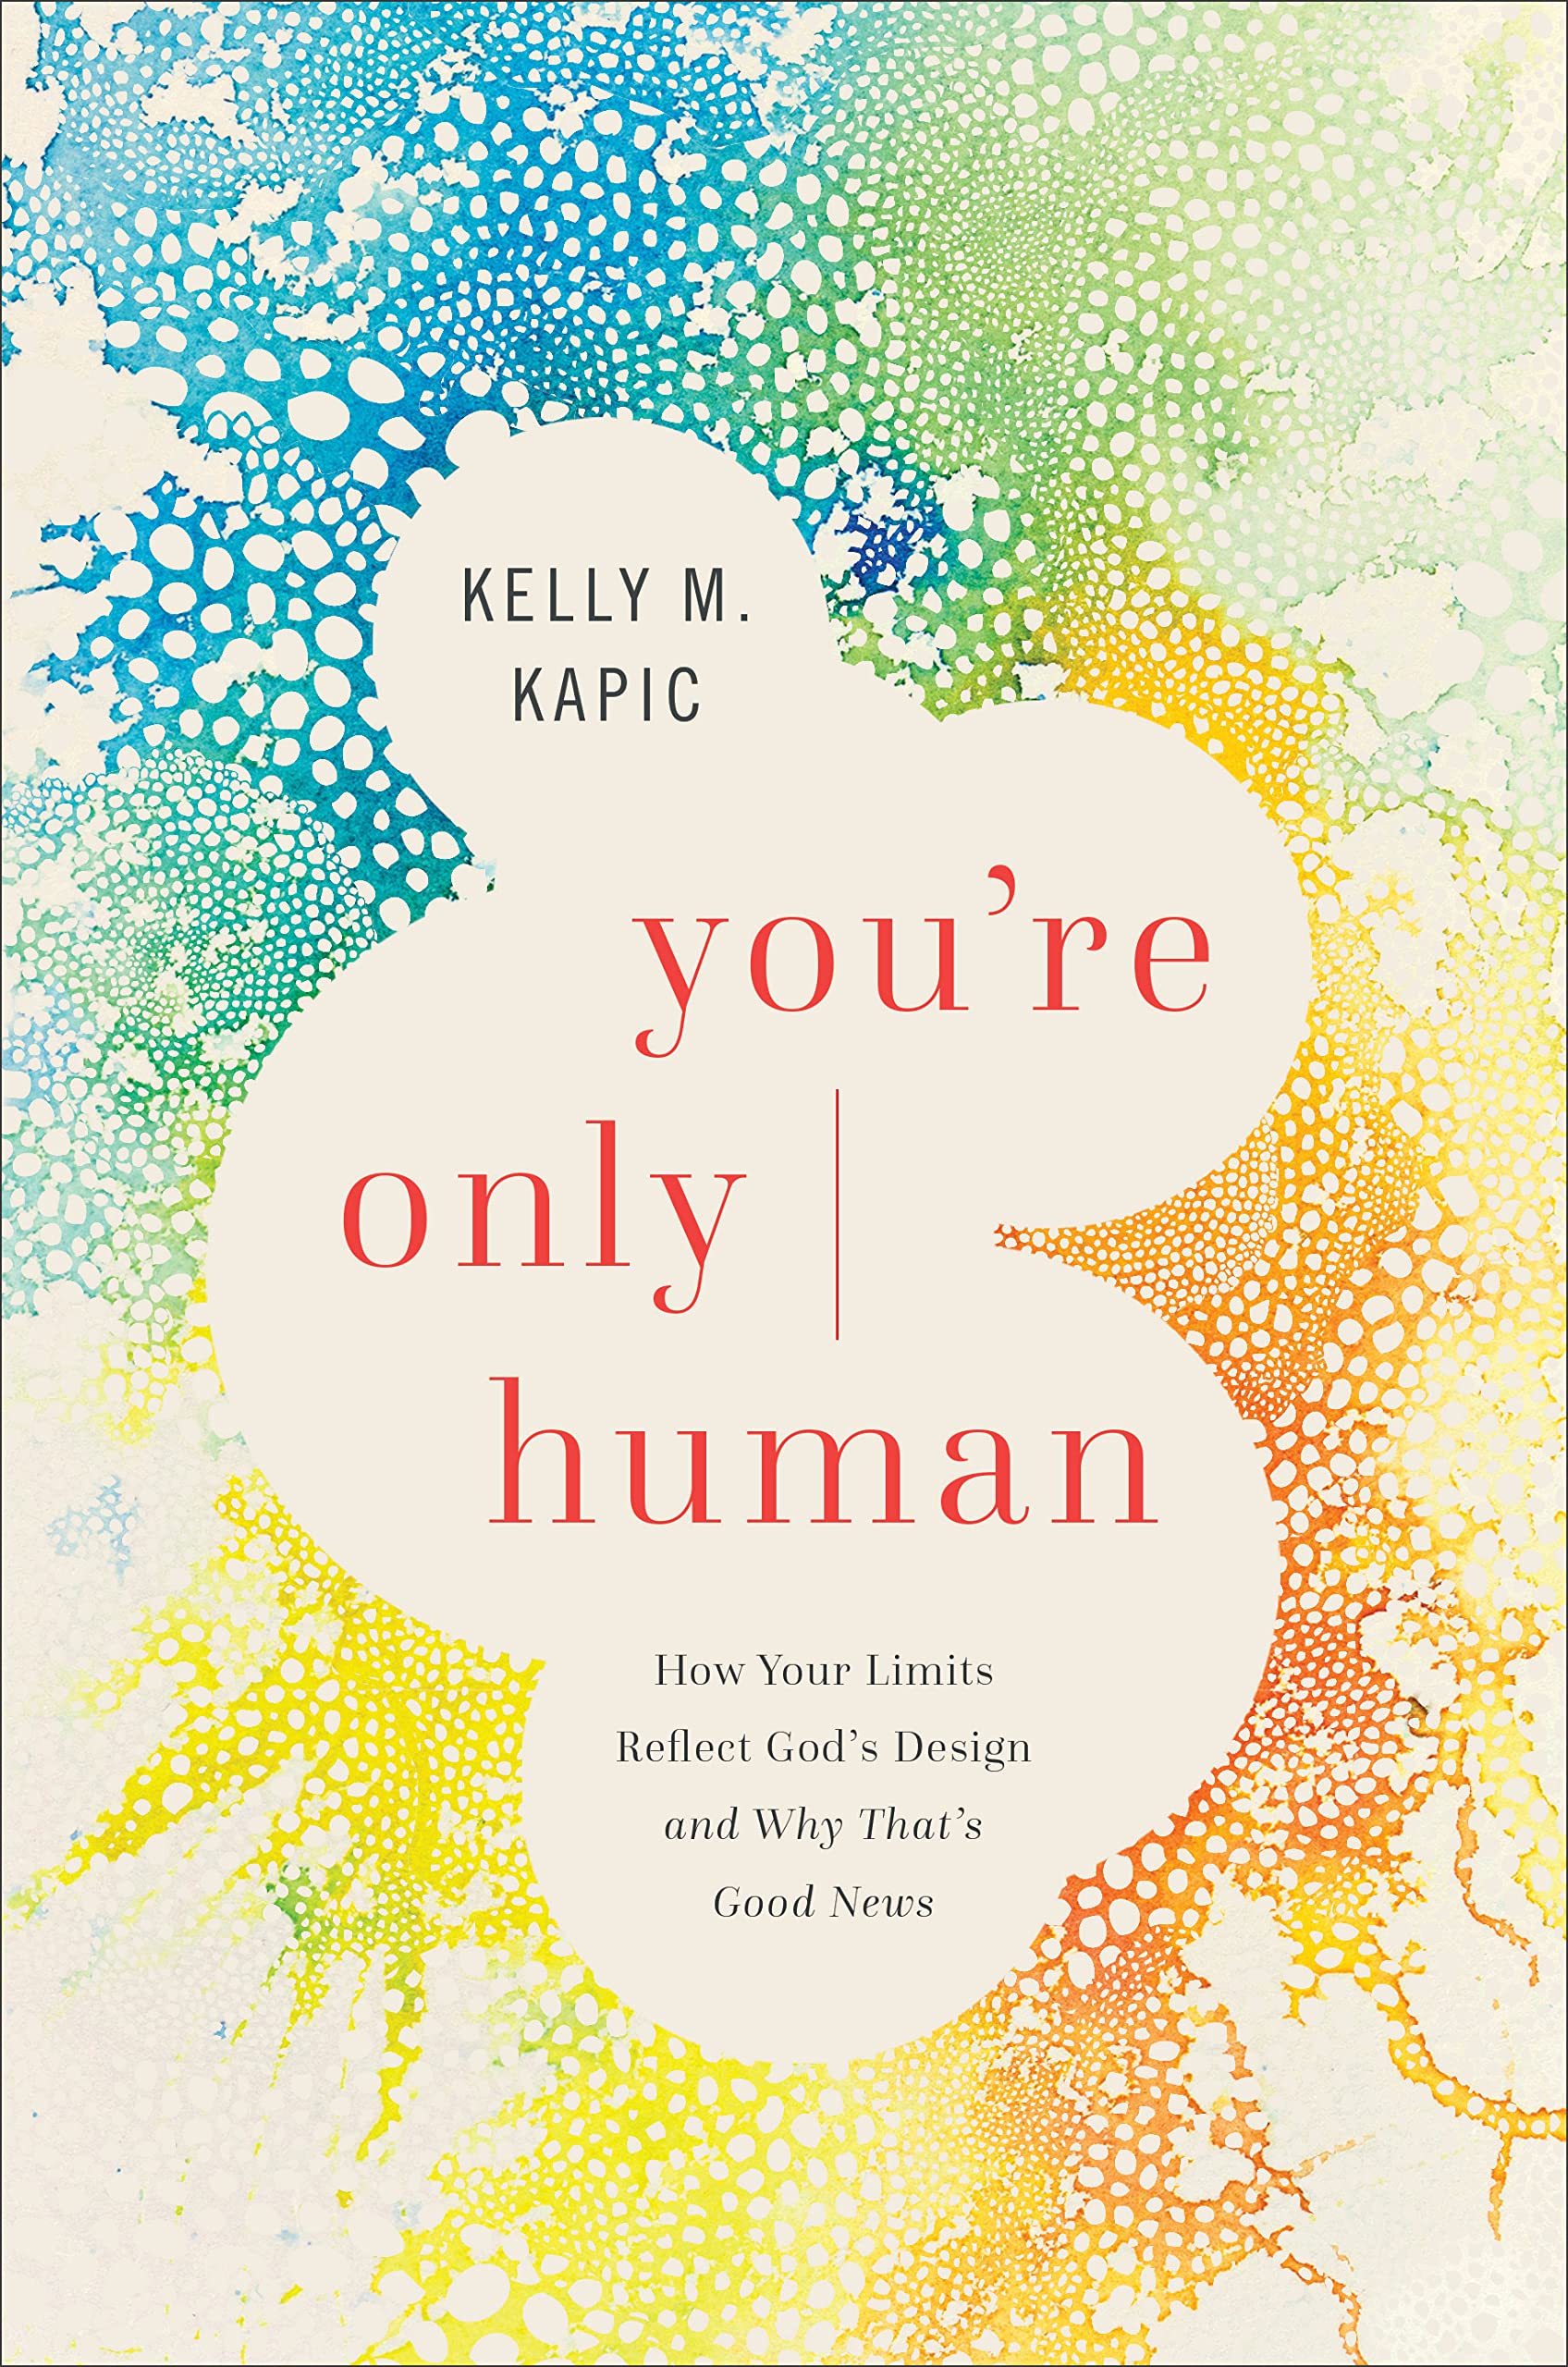 Kelly　9781587435102　M　You're　Kapic,　Bookstore　Only　Westminster　Human　–